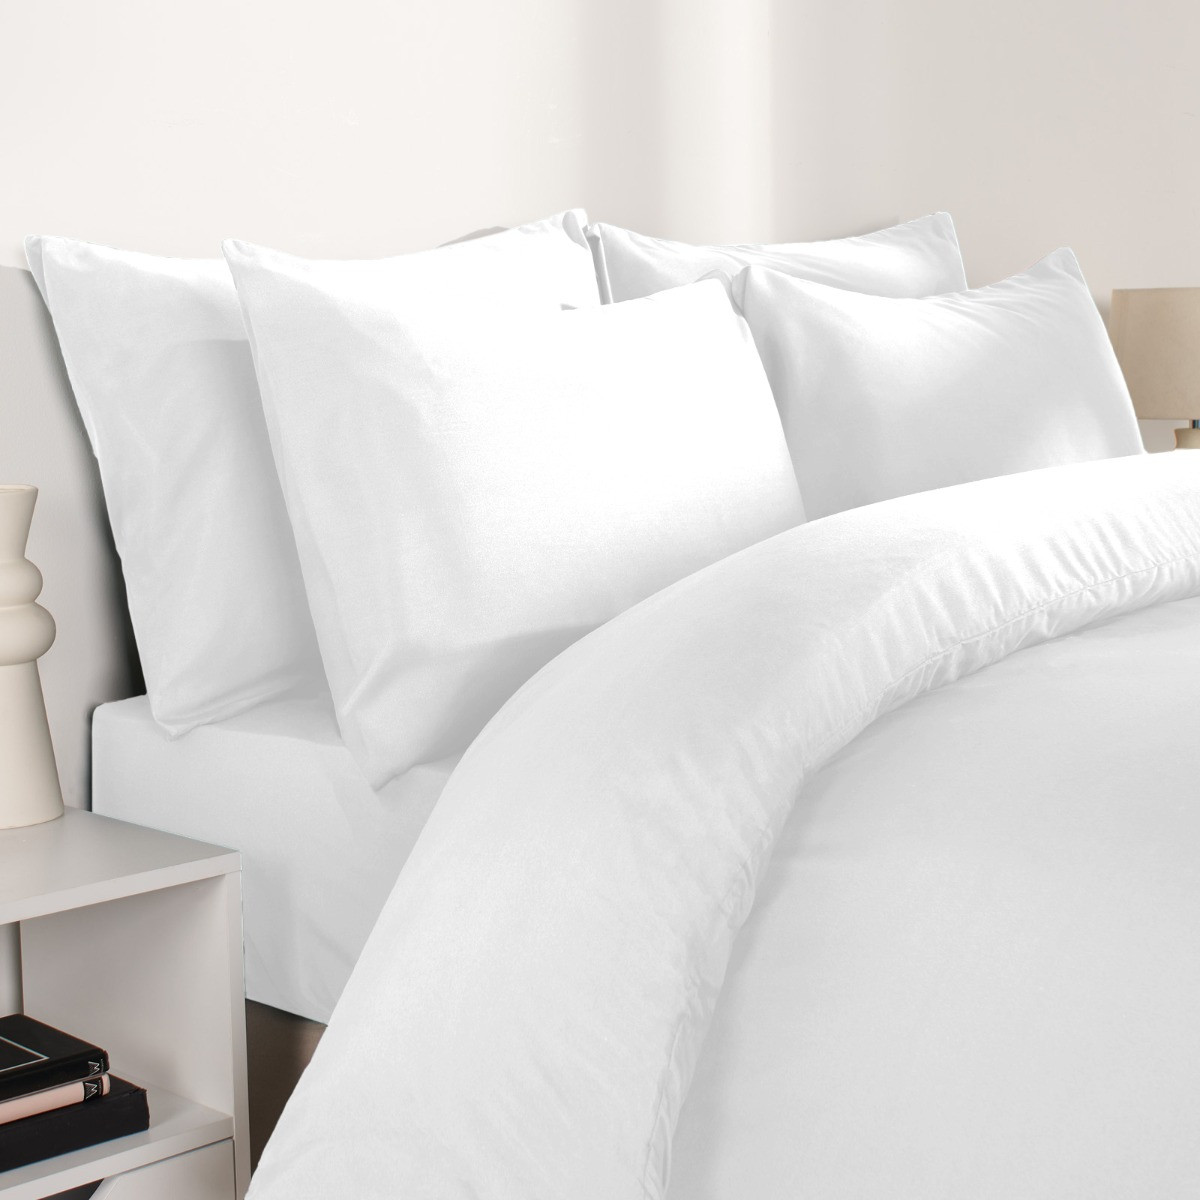 Brentfords 2 Pack Plain Dyed Housewife Pillowcases - White>